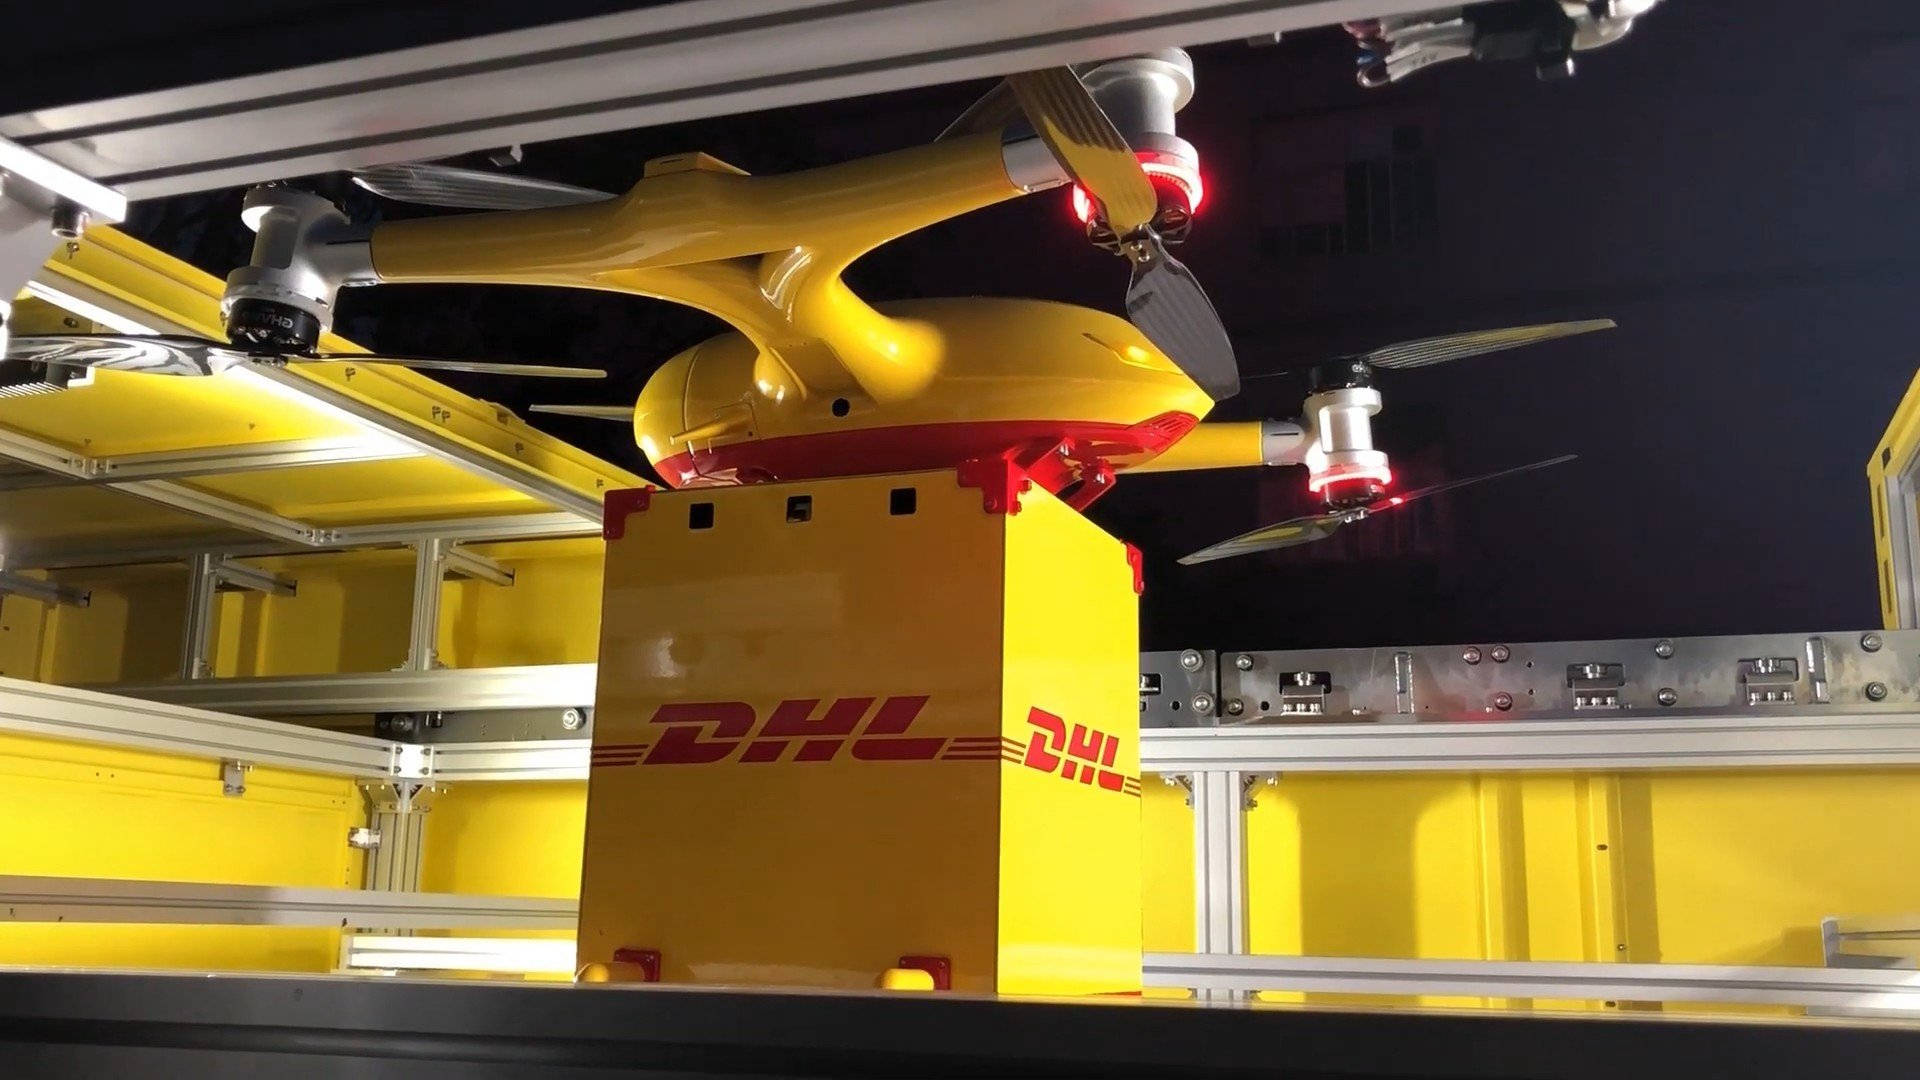 DHL Delivery Drone Wallpaper